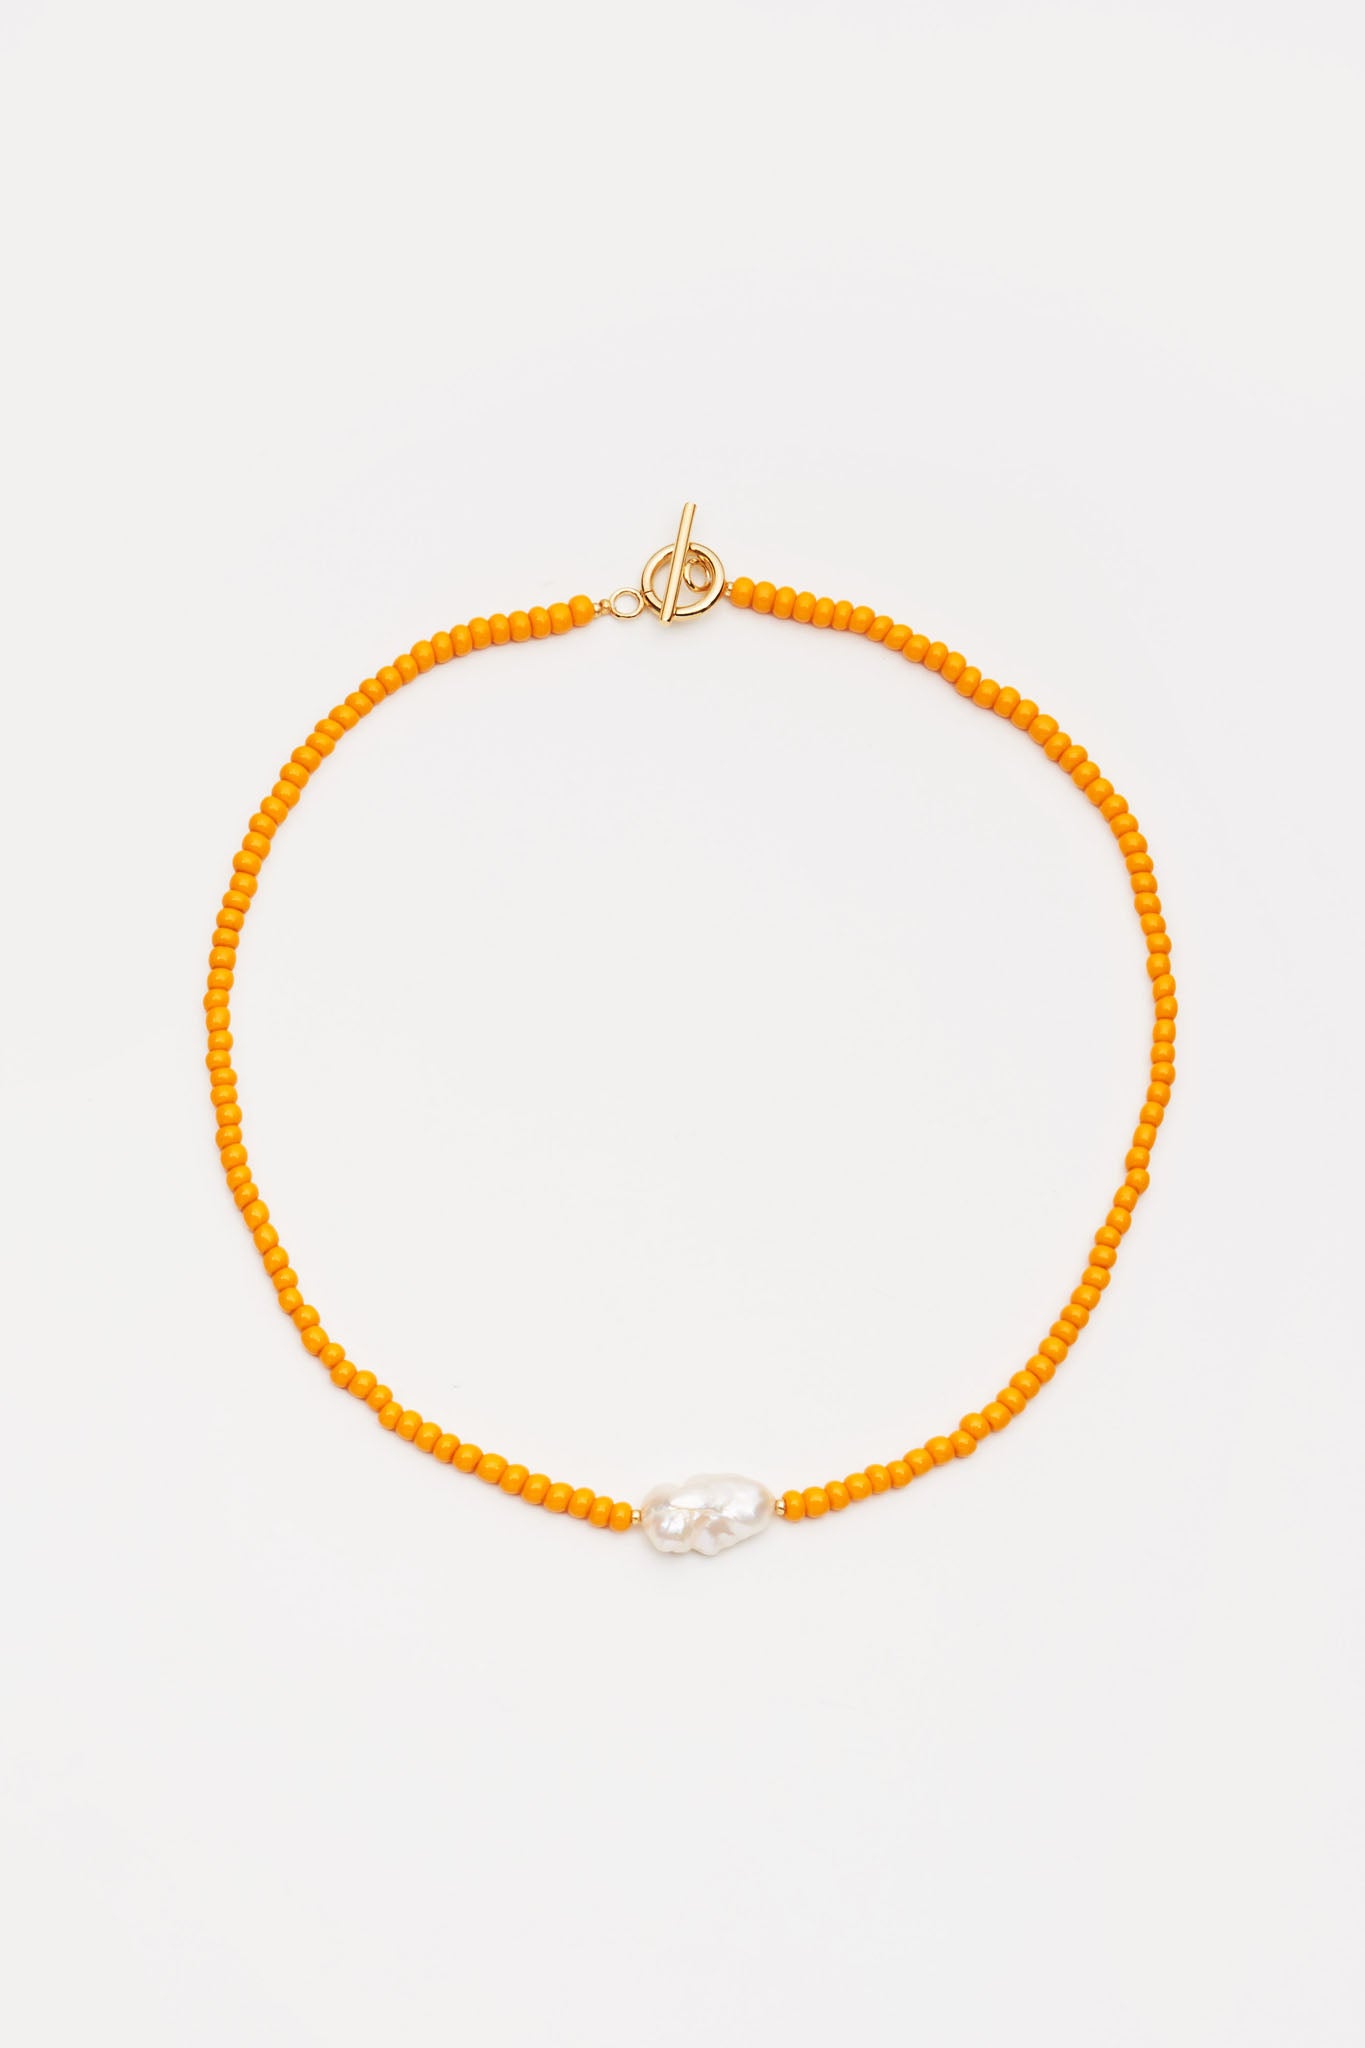 Beaded orange necklace with pearl pendant